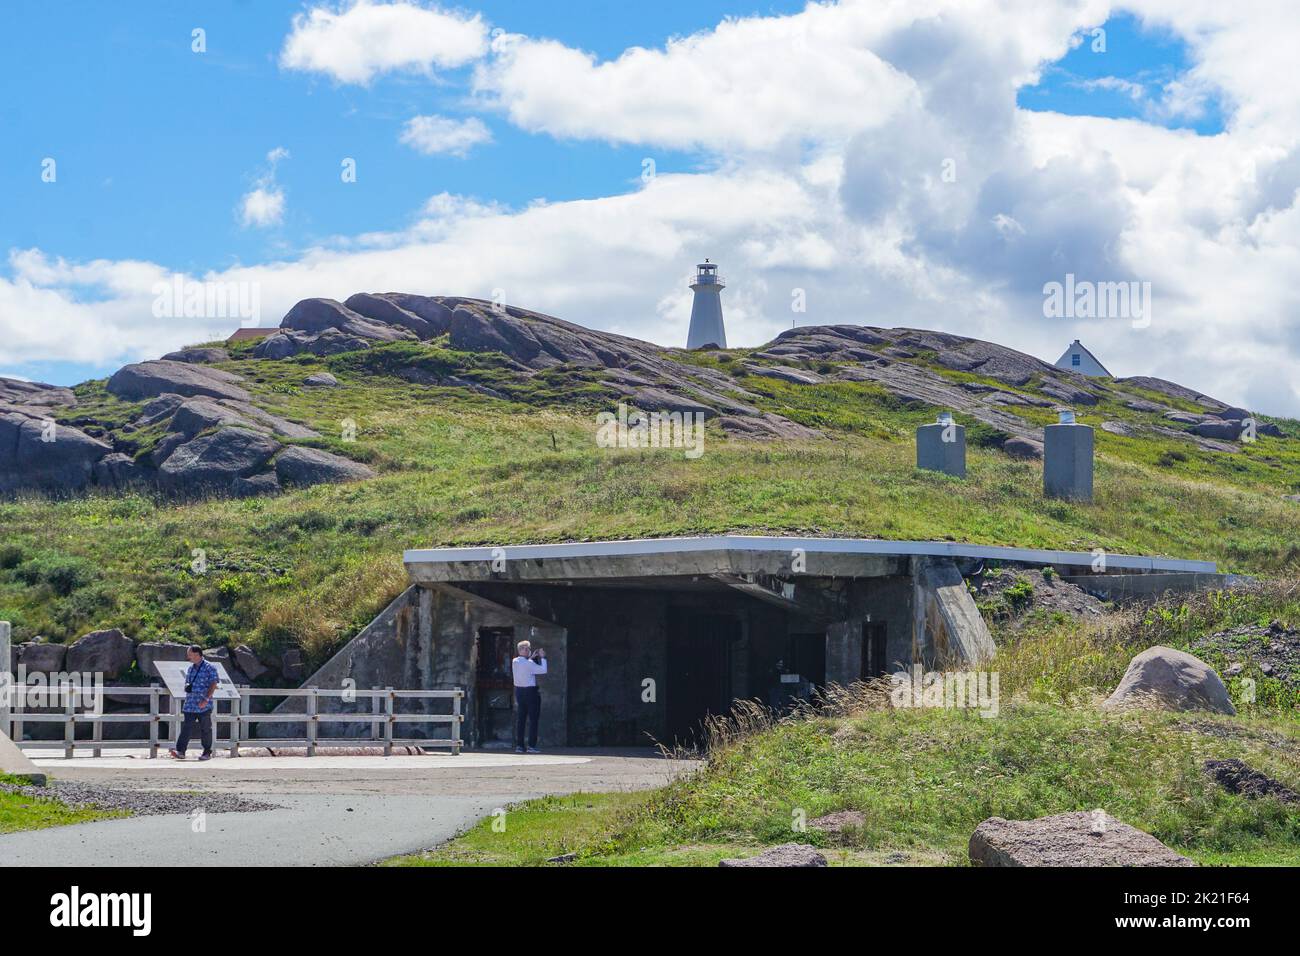 Cape Spear, Newfoundland, Canada: Lighthouse on the hill above the underground passages leading to bunkers built for troops stationed here during WWII. Stock Photo